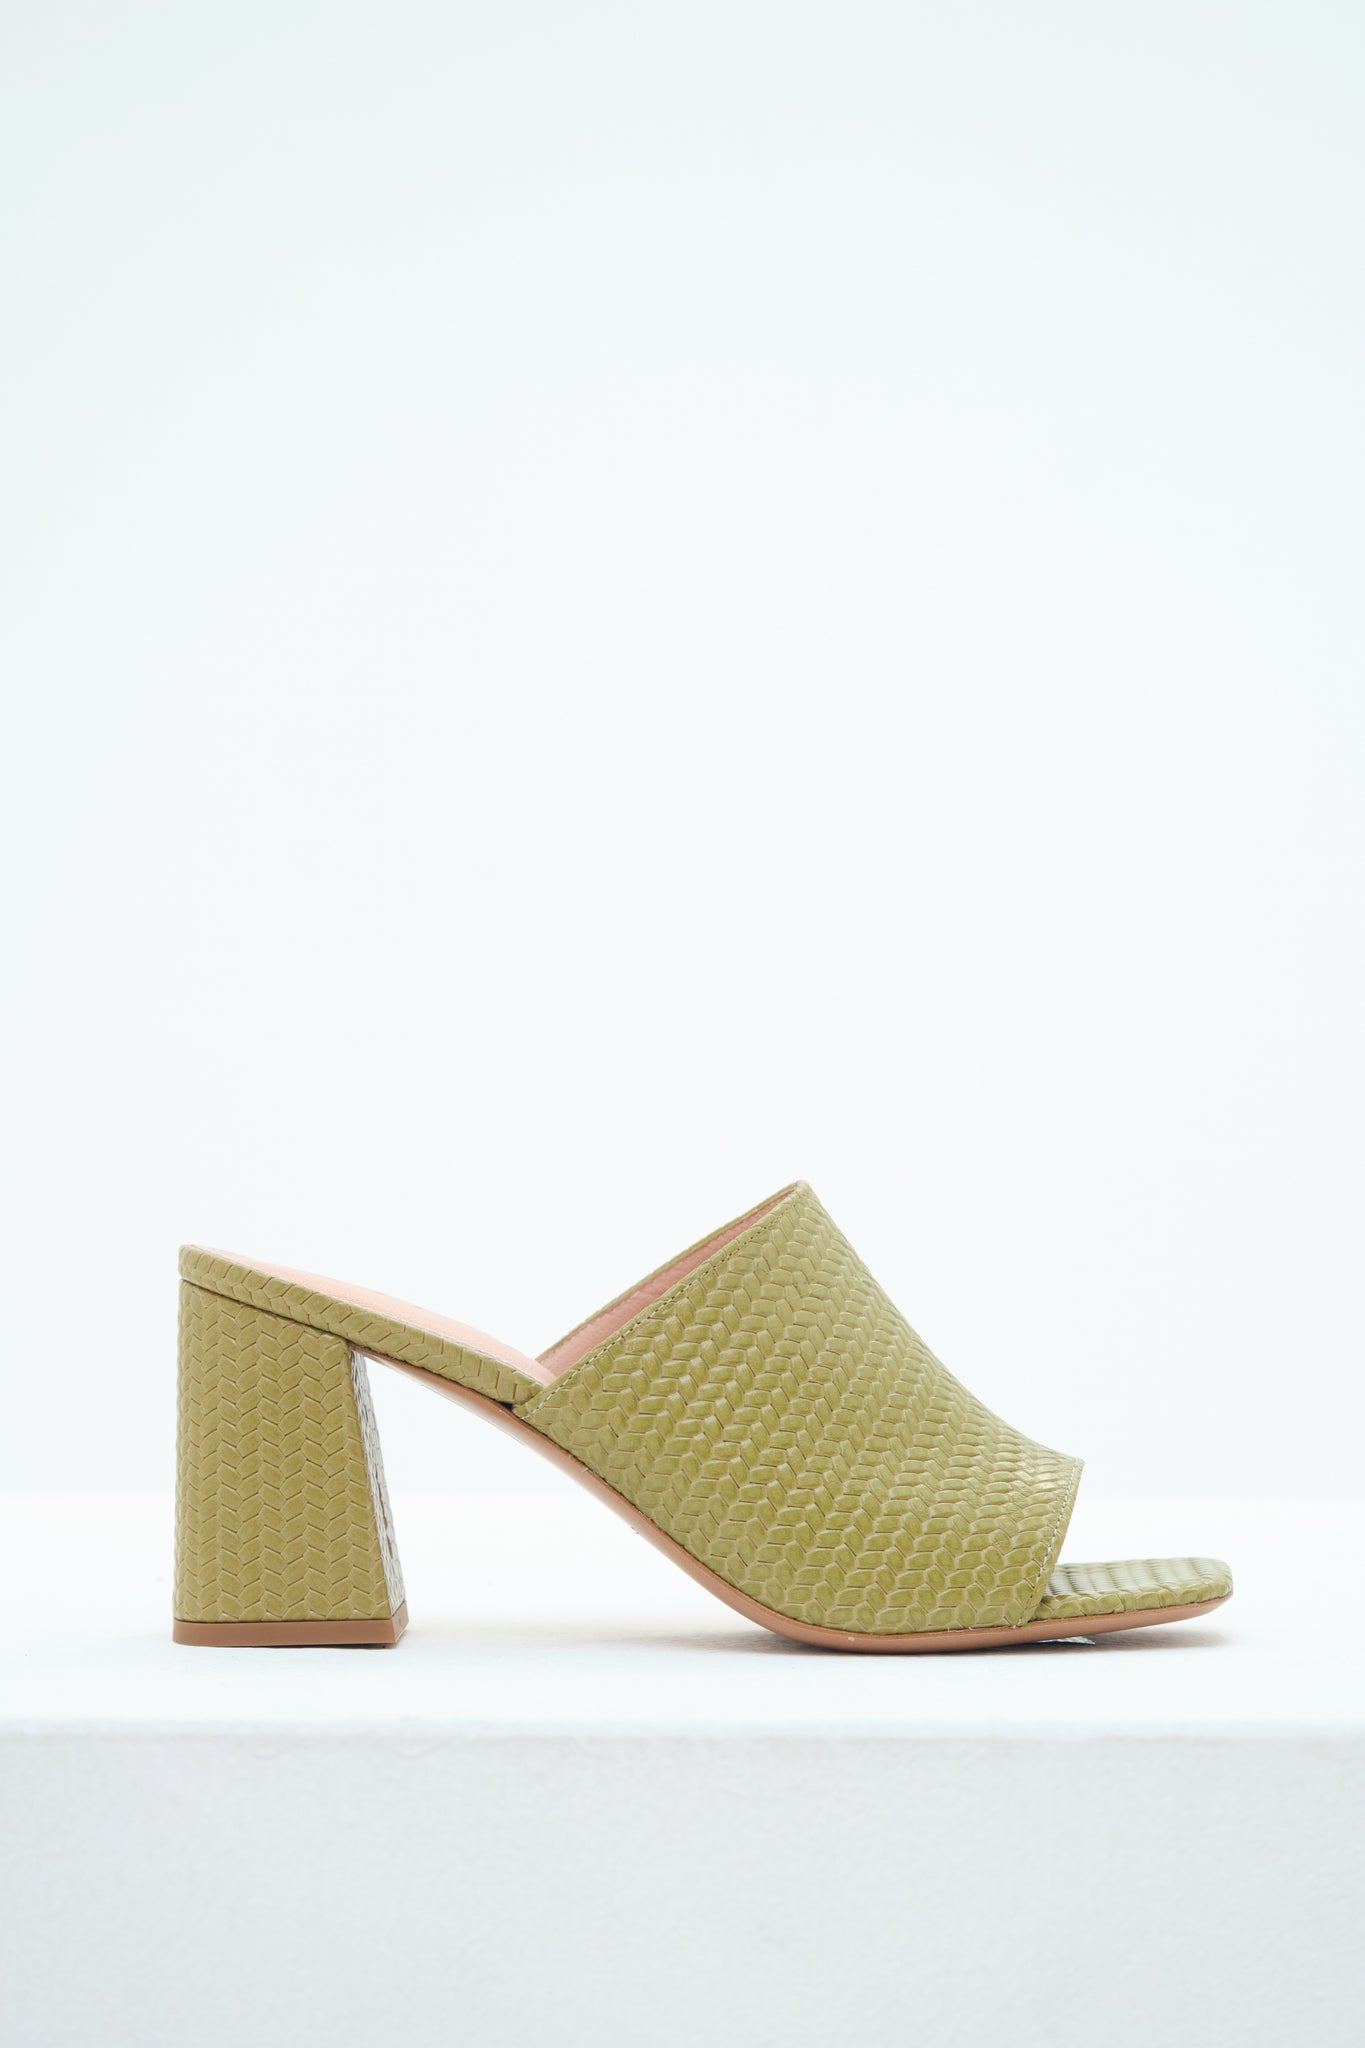 EVITA MULE - ONLY OLIVE